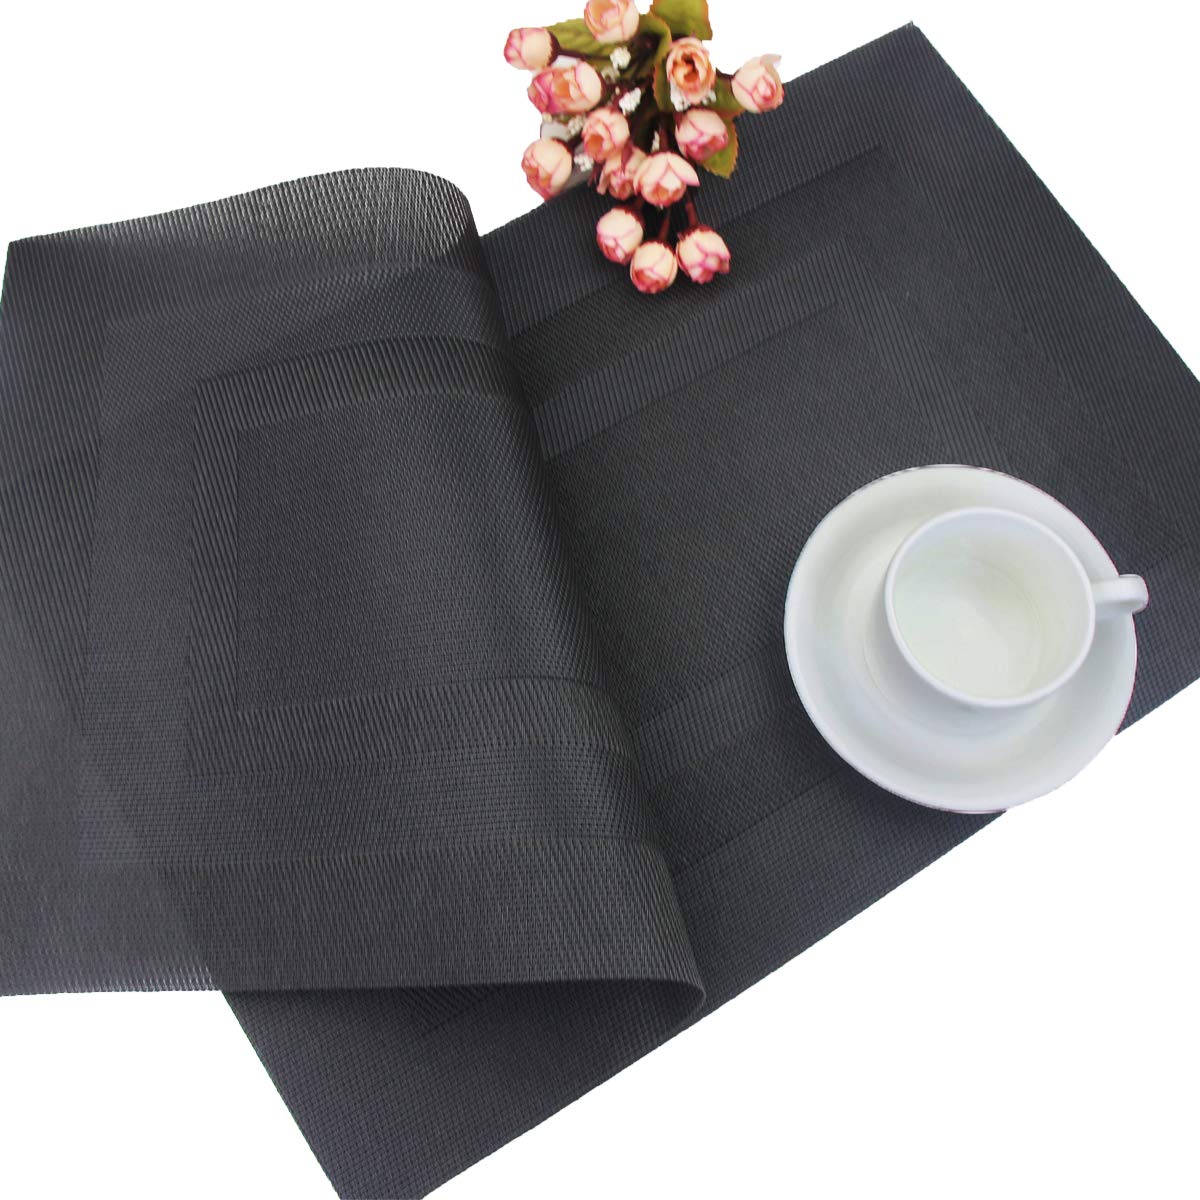 PIGCHCY Placemats,Washable Vinyl Woven Table Mats,Elegant Placemats for Dining Table Set of 4(18